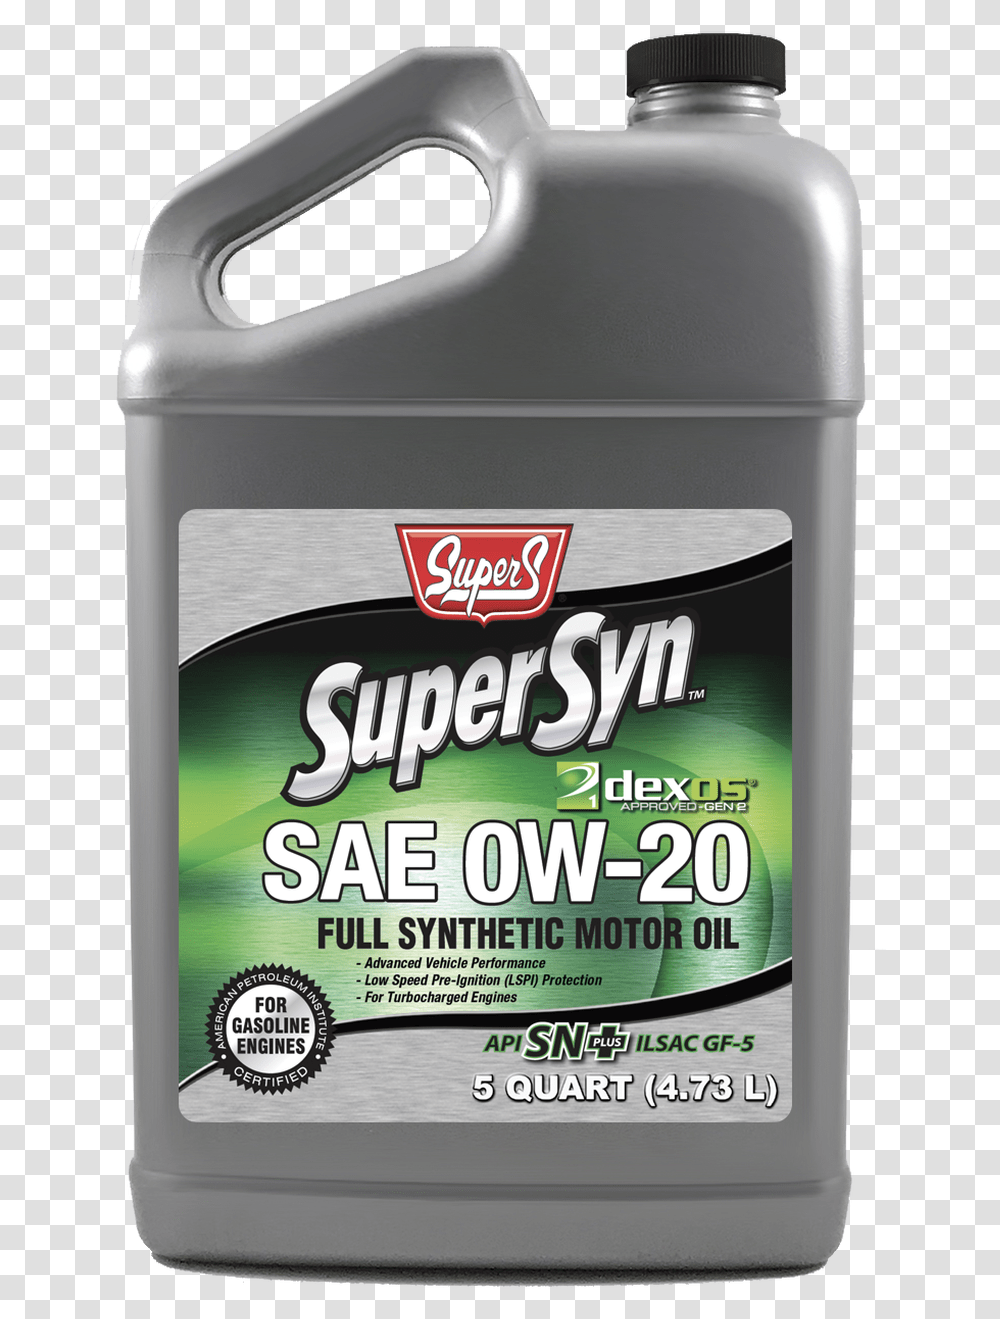 Super S Supersyn Dexos1 Gen2 Full Synthetic Sae 0w Leather, Label, Plant, Mailbox Transparent Png